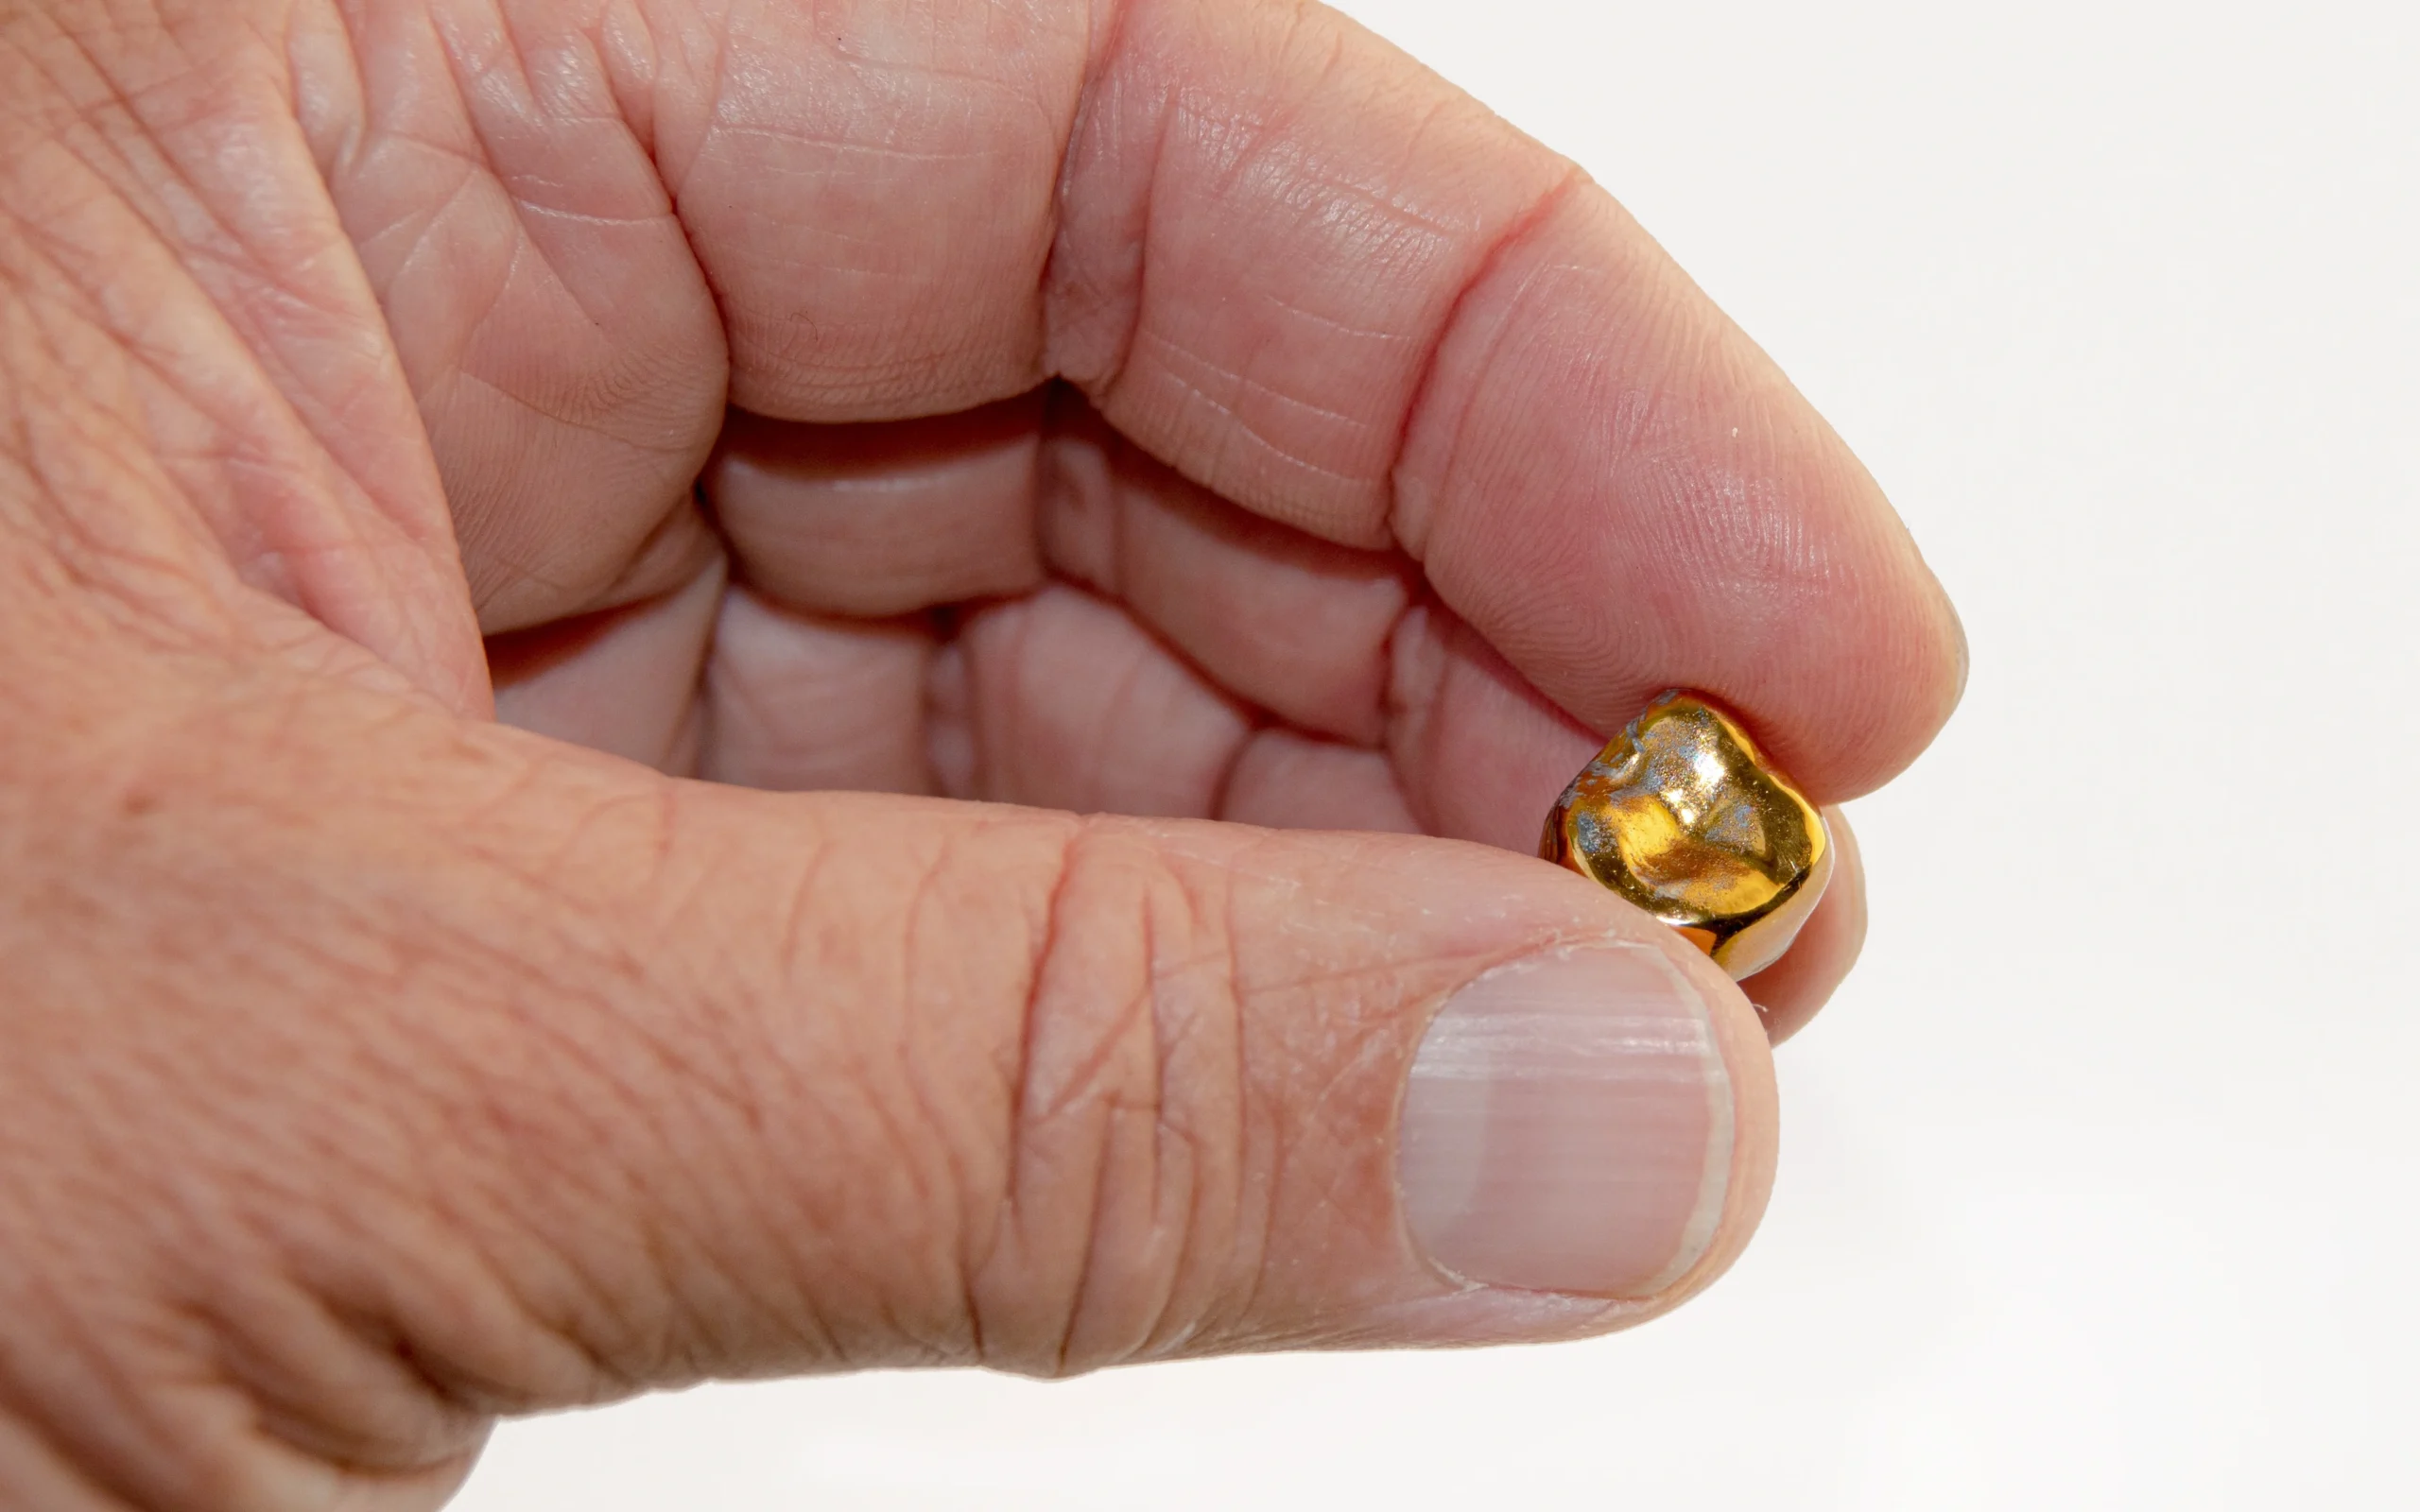 A hand holding a single gold crown tooth implant